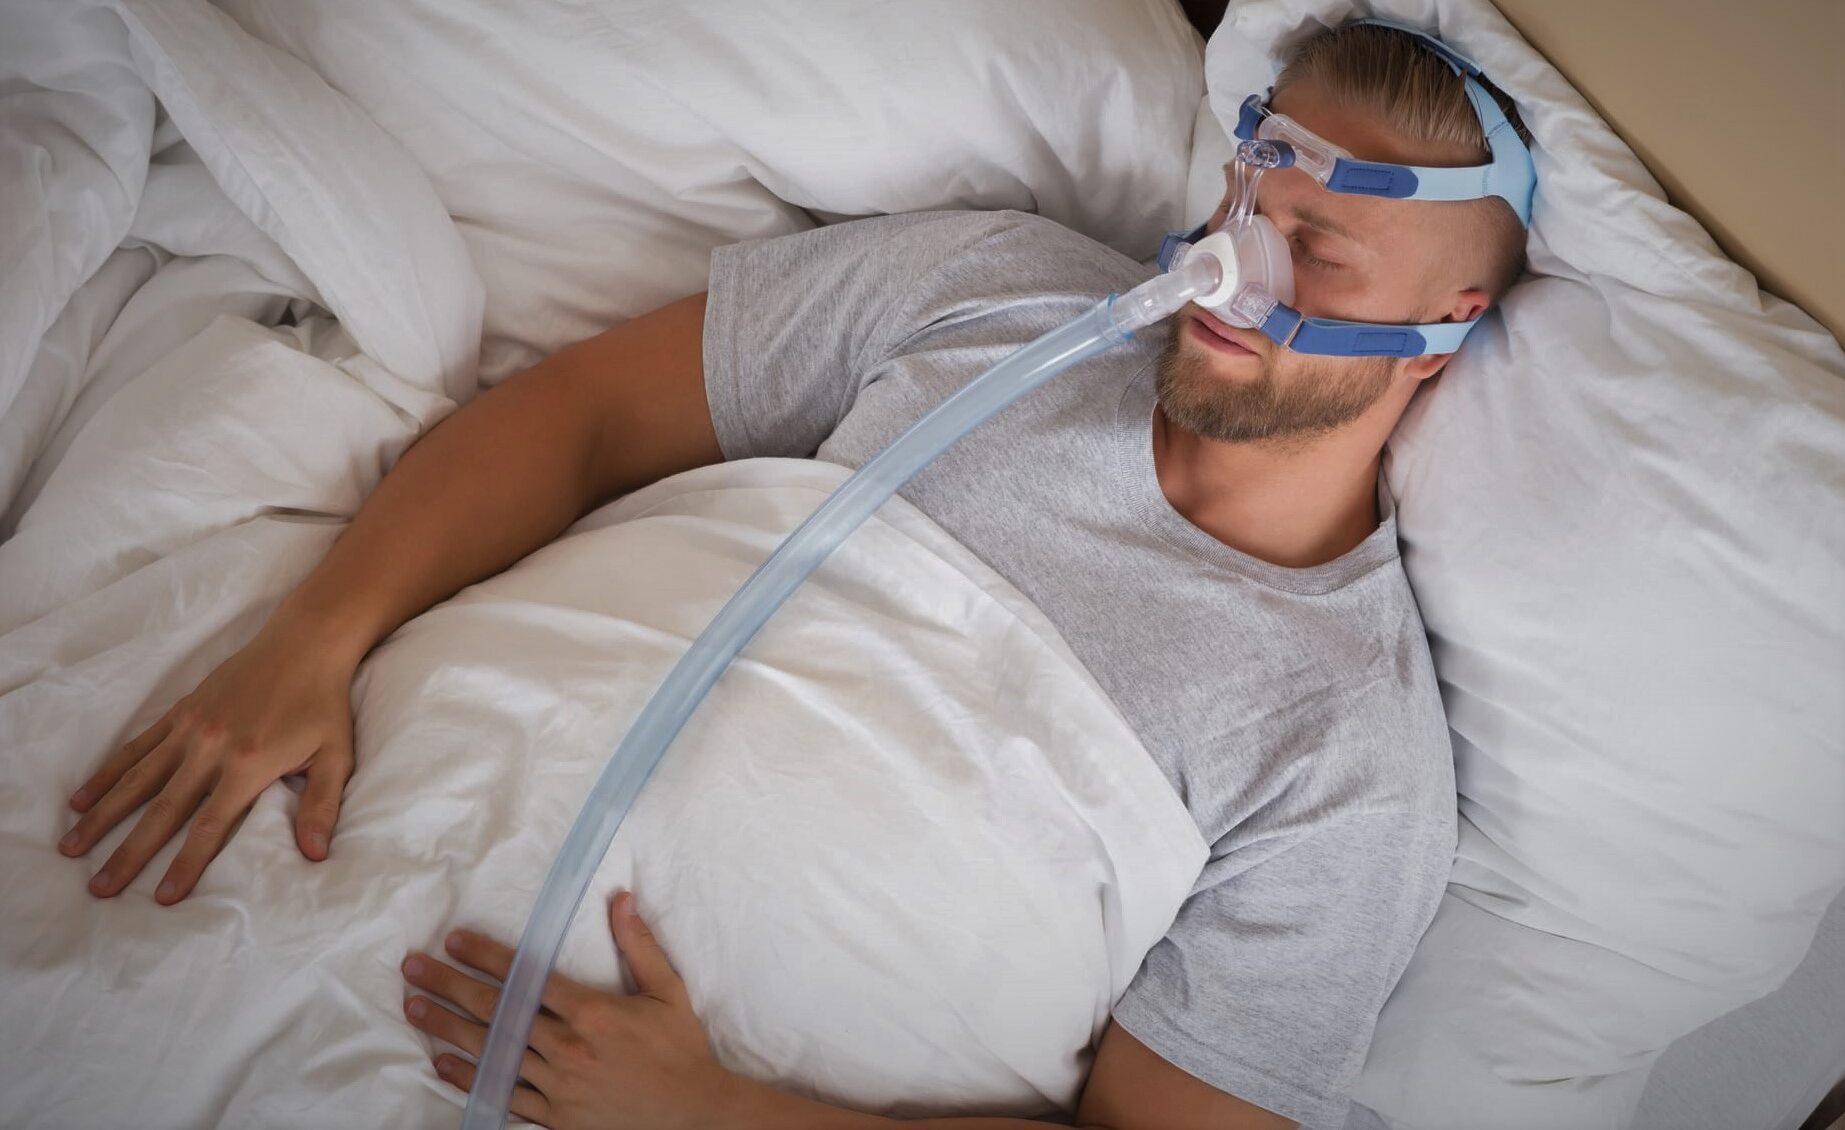 Sleep Apnea Devices Market Size, Share, Growth, Trends and Demands by 2026